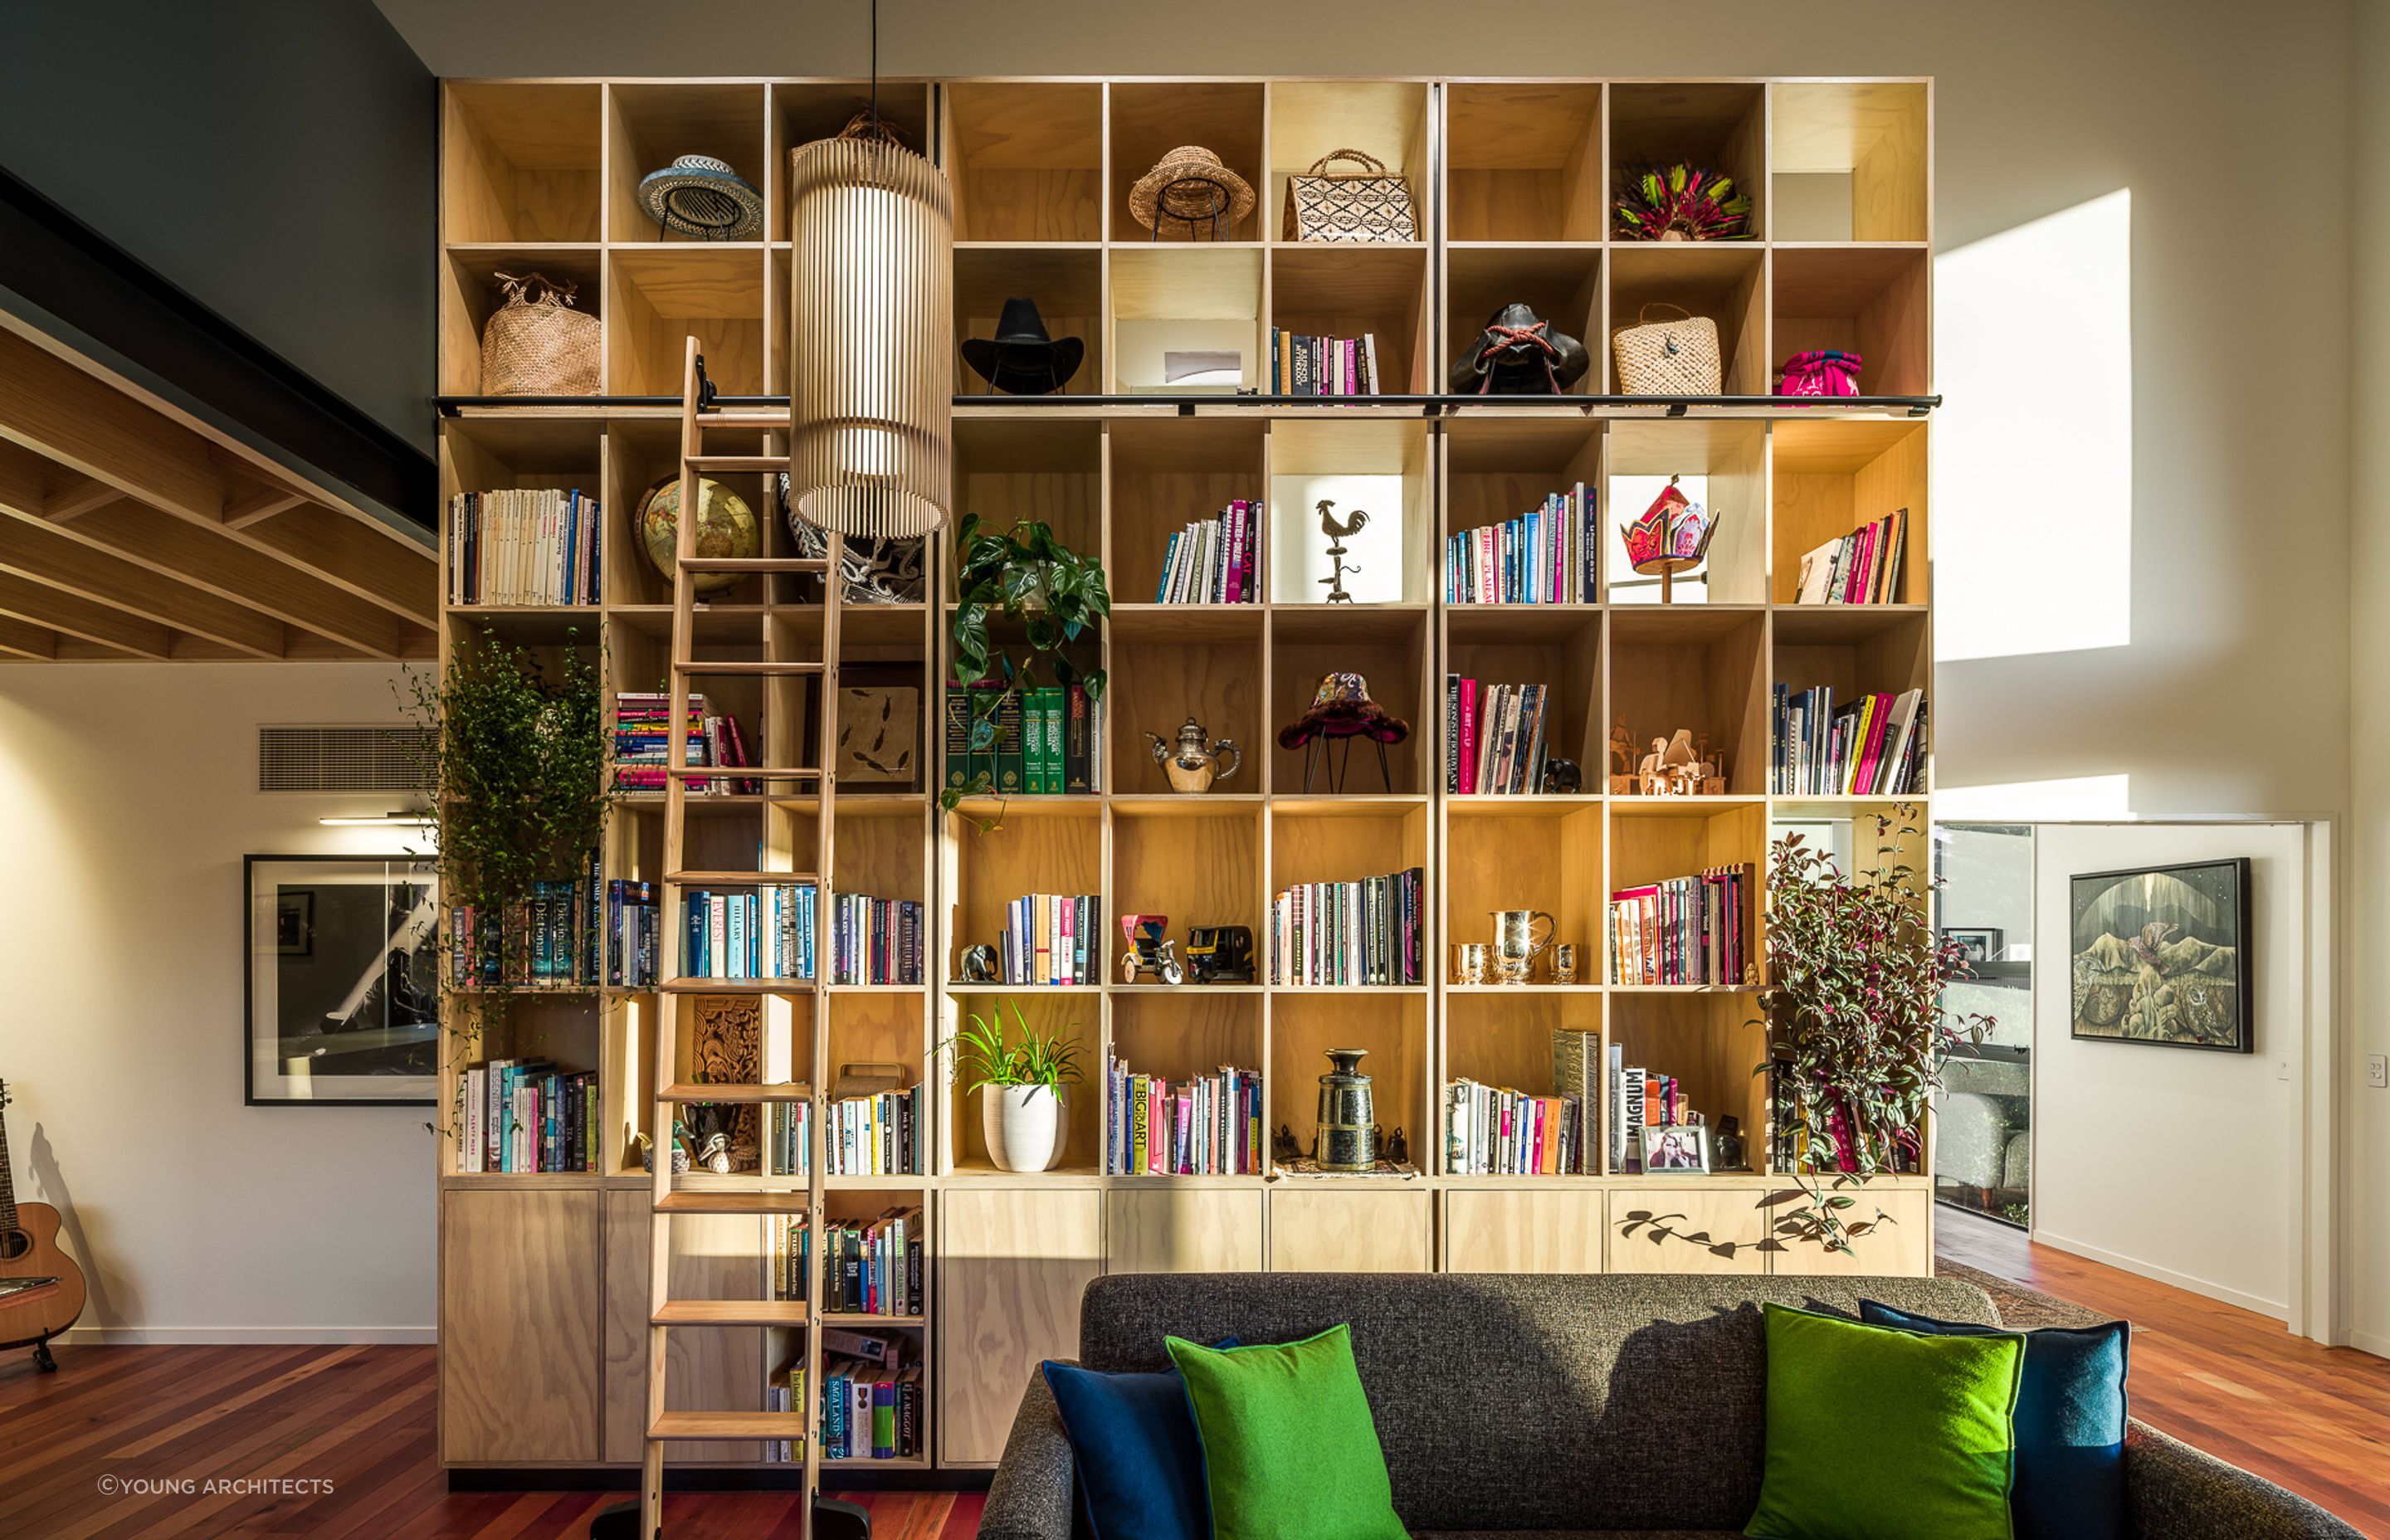 The inclusion of some beautiful pot plants brings tremendous vitality to this impressive bookcase in this home in the Port Hills of Christchurch. Photography: Dennis Rademacher